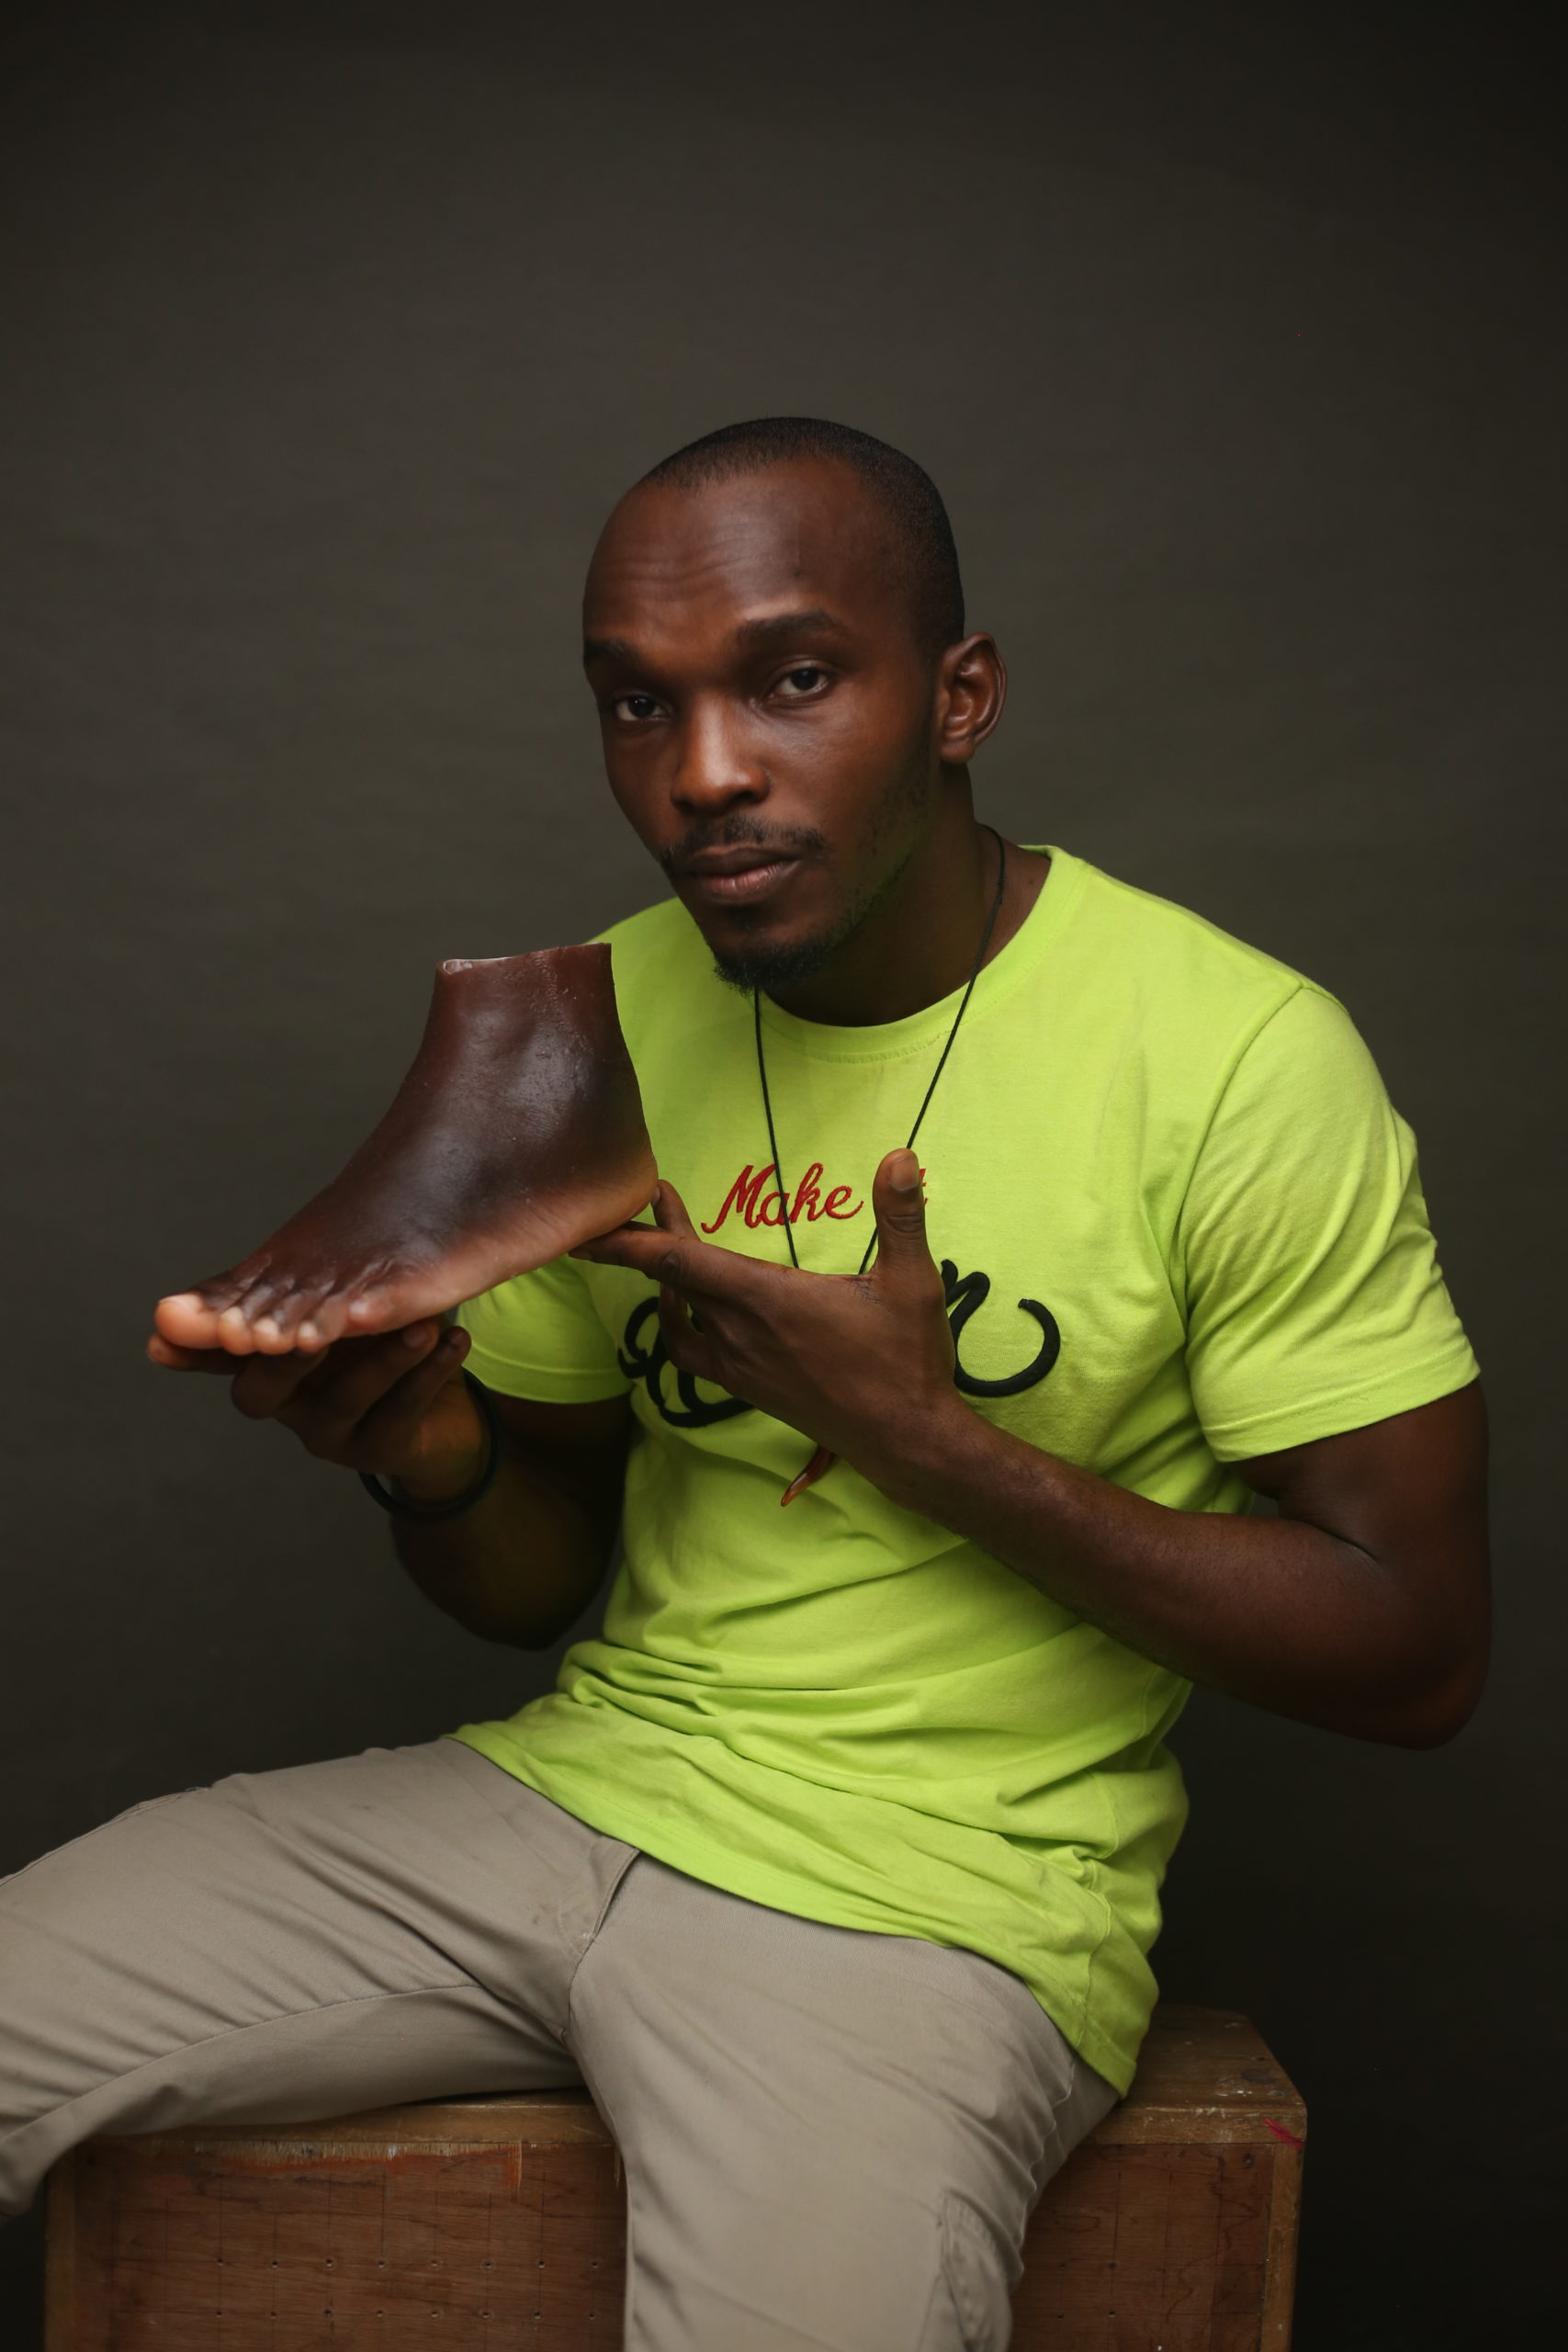 John Amanam's Hyper-Realistic Prostheses Are Giving Amputees a Semblance of  Their Body Parts